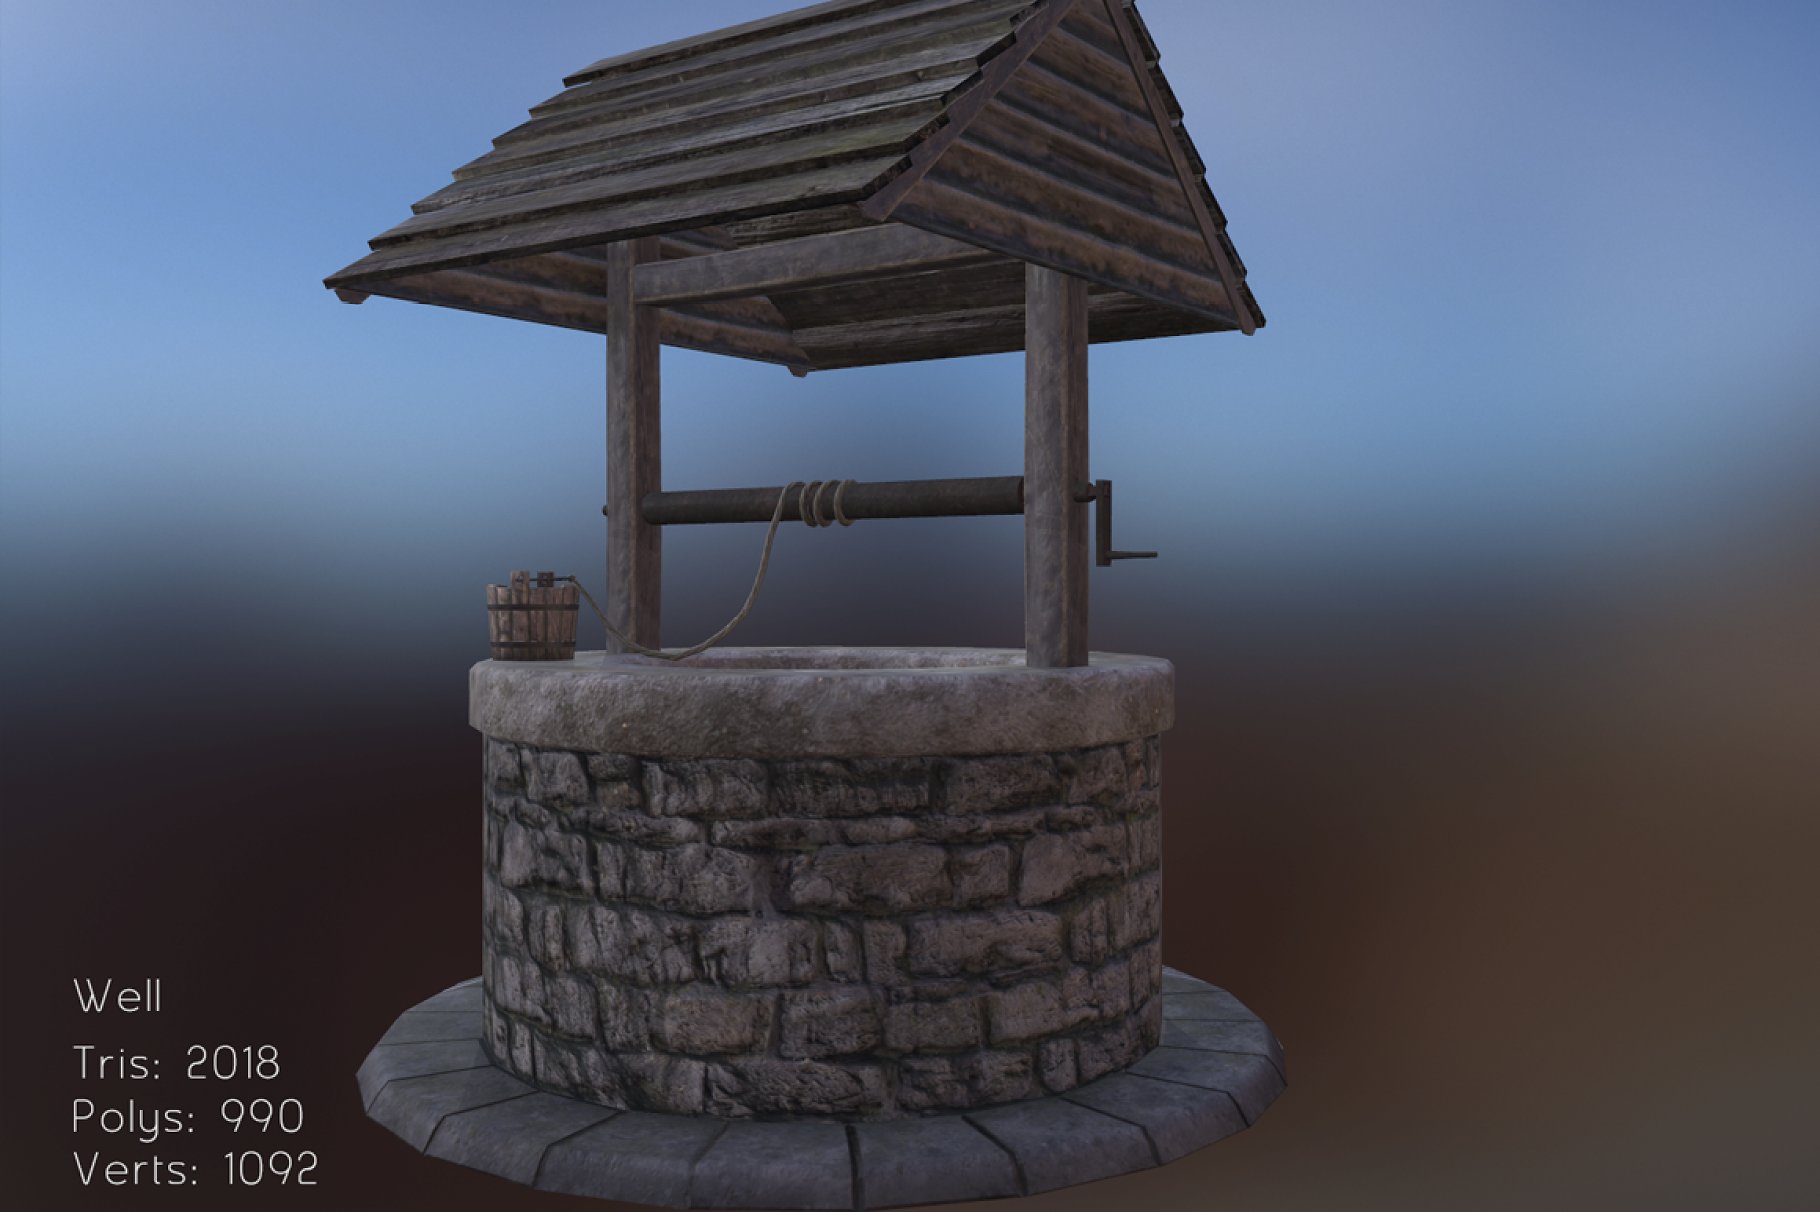 Mockup of medieval well on a blue and brown background.